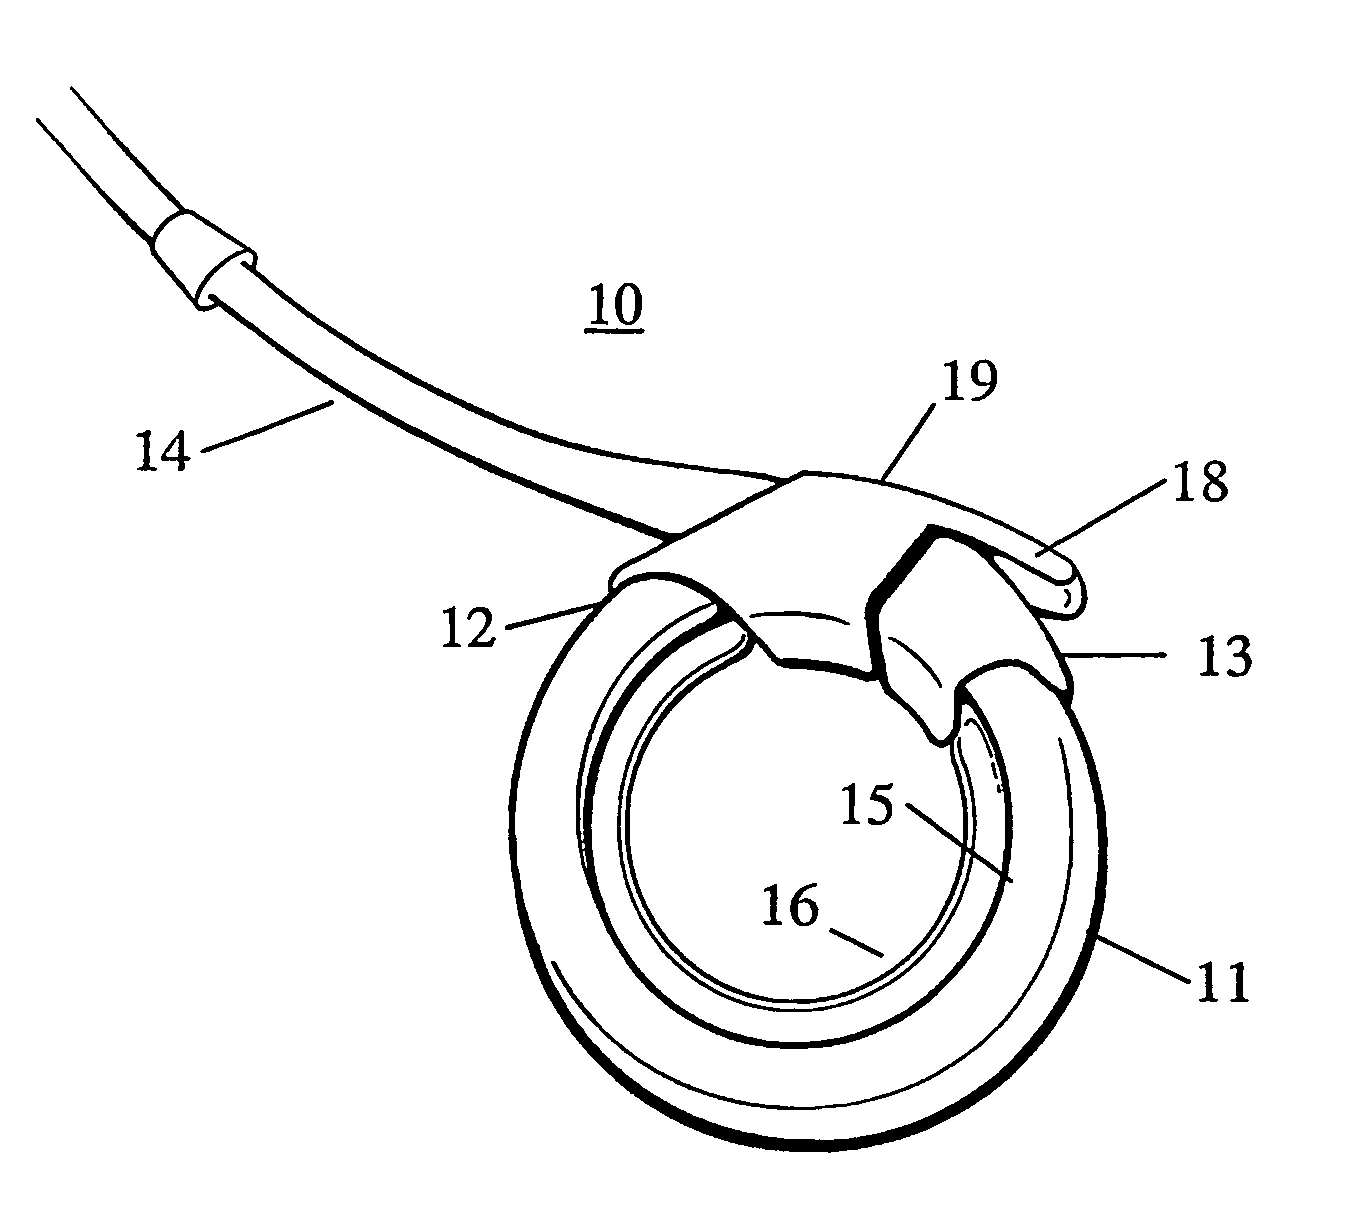 Remotely adjustable gastric banding device and method